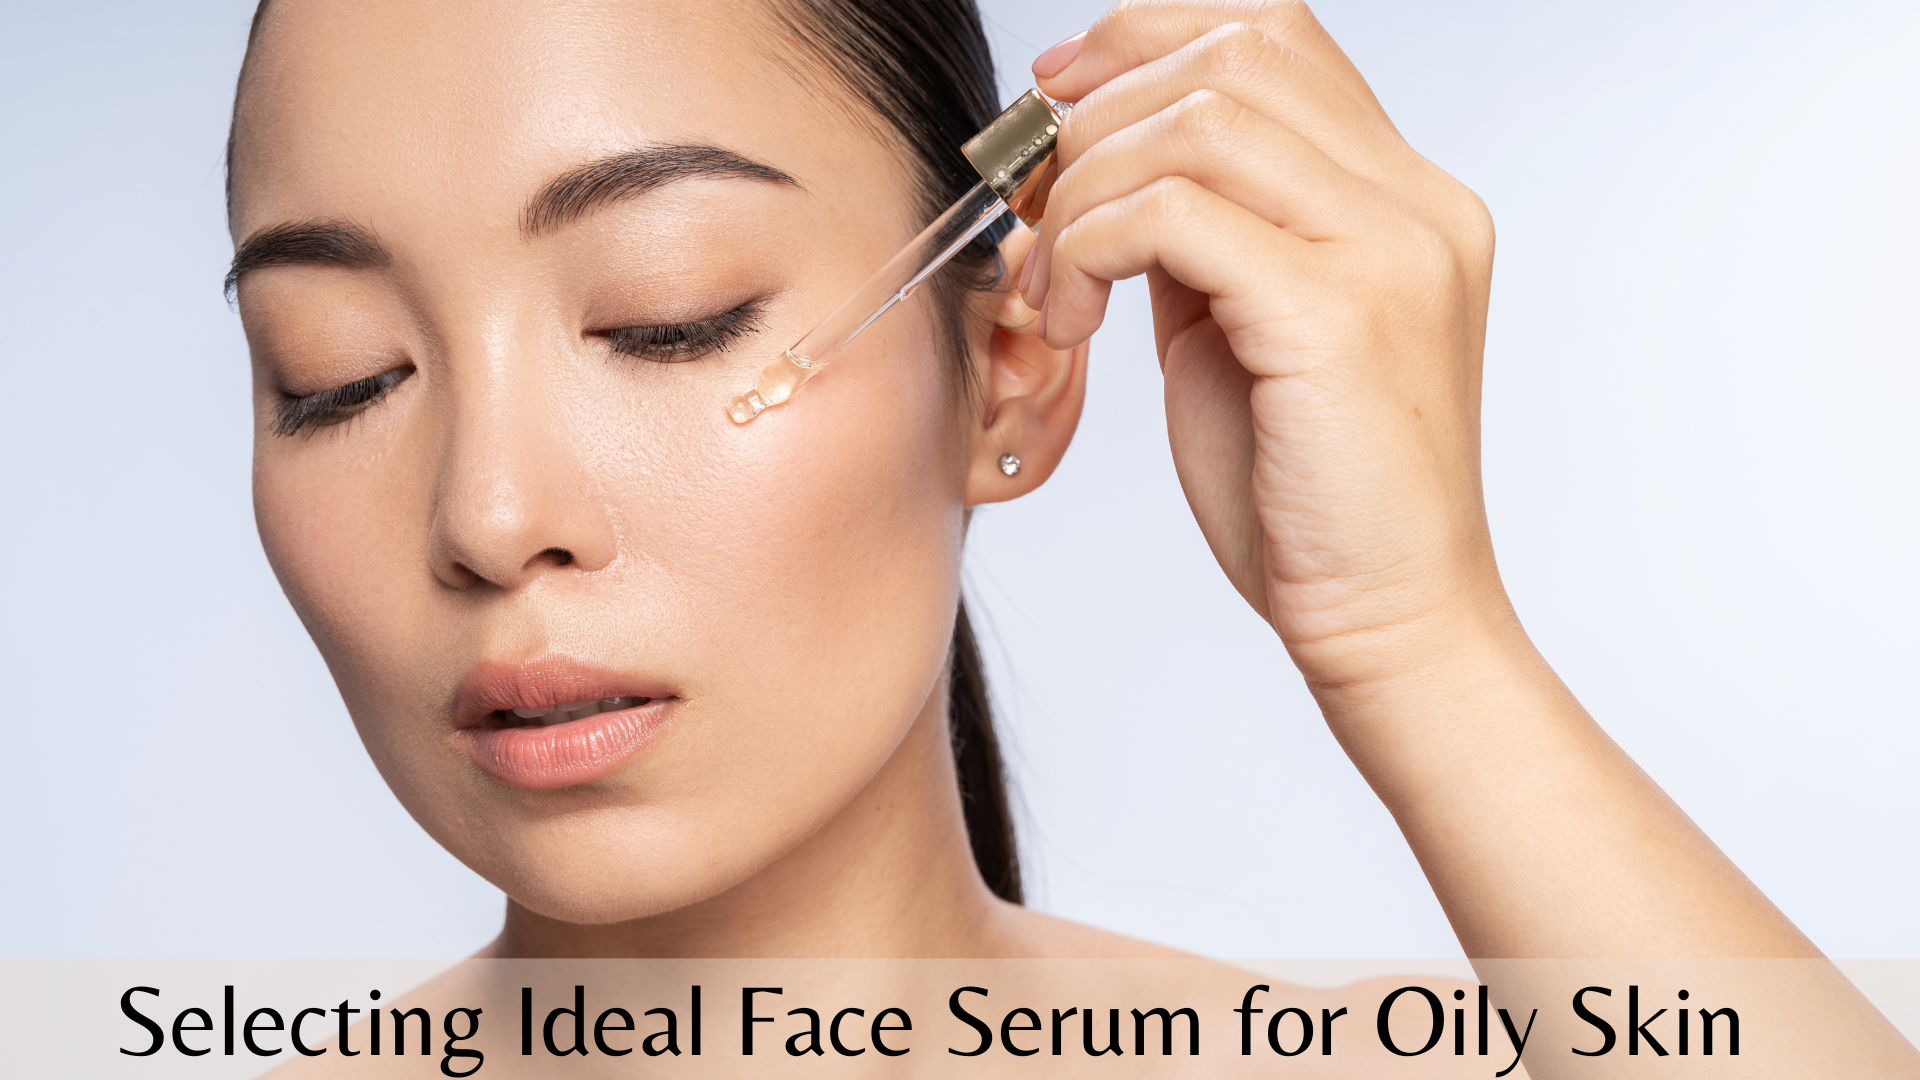 A Deep-Dive Into Selecting The Ideal Face Serum for Oily Skin